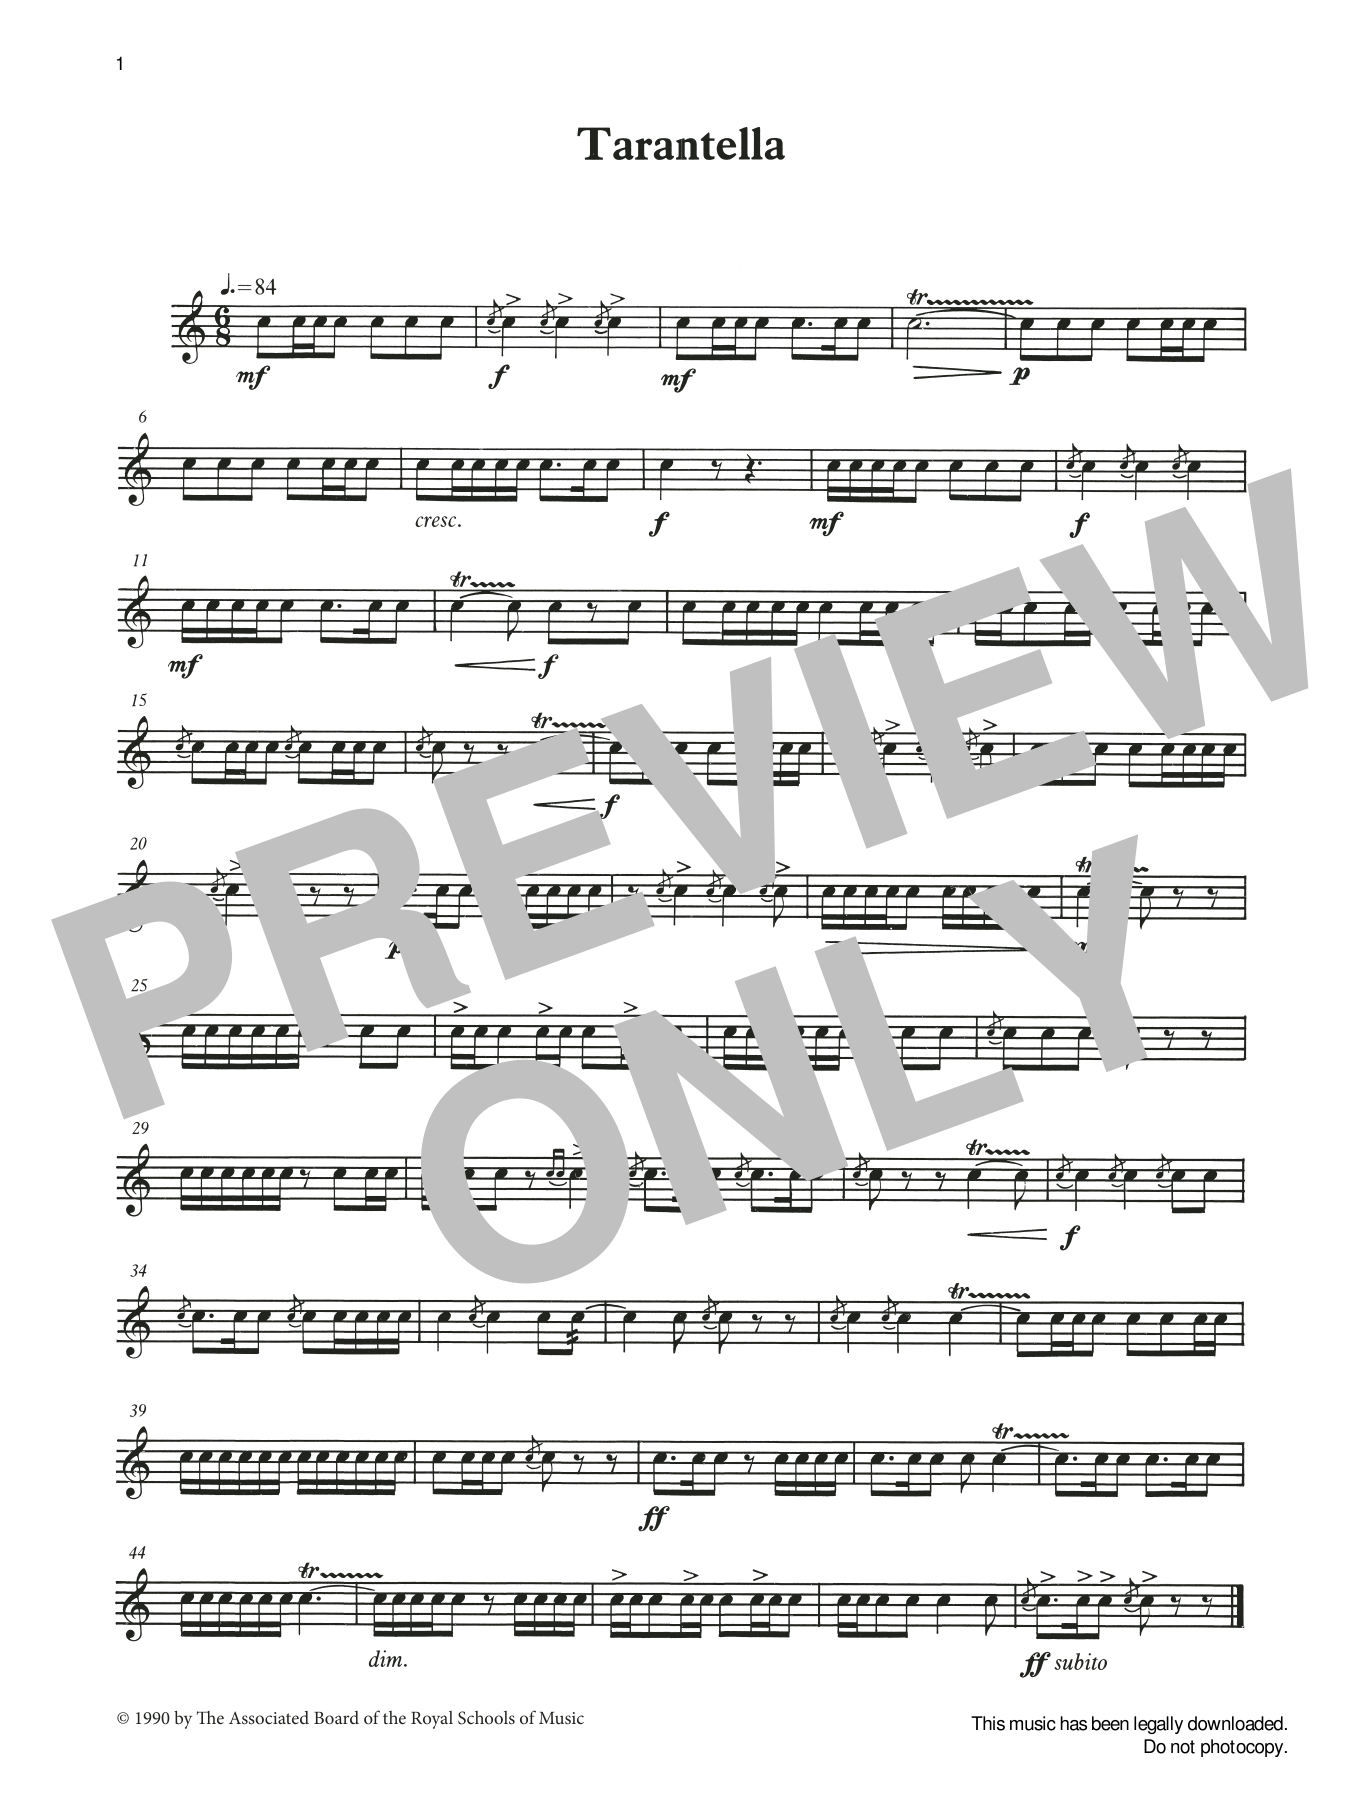 Download Ian Wright and Kevin Hathaway Tarantella from Graded Music for Snare Sheet Music